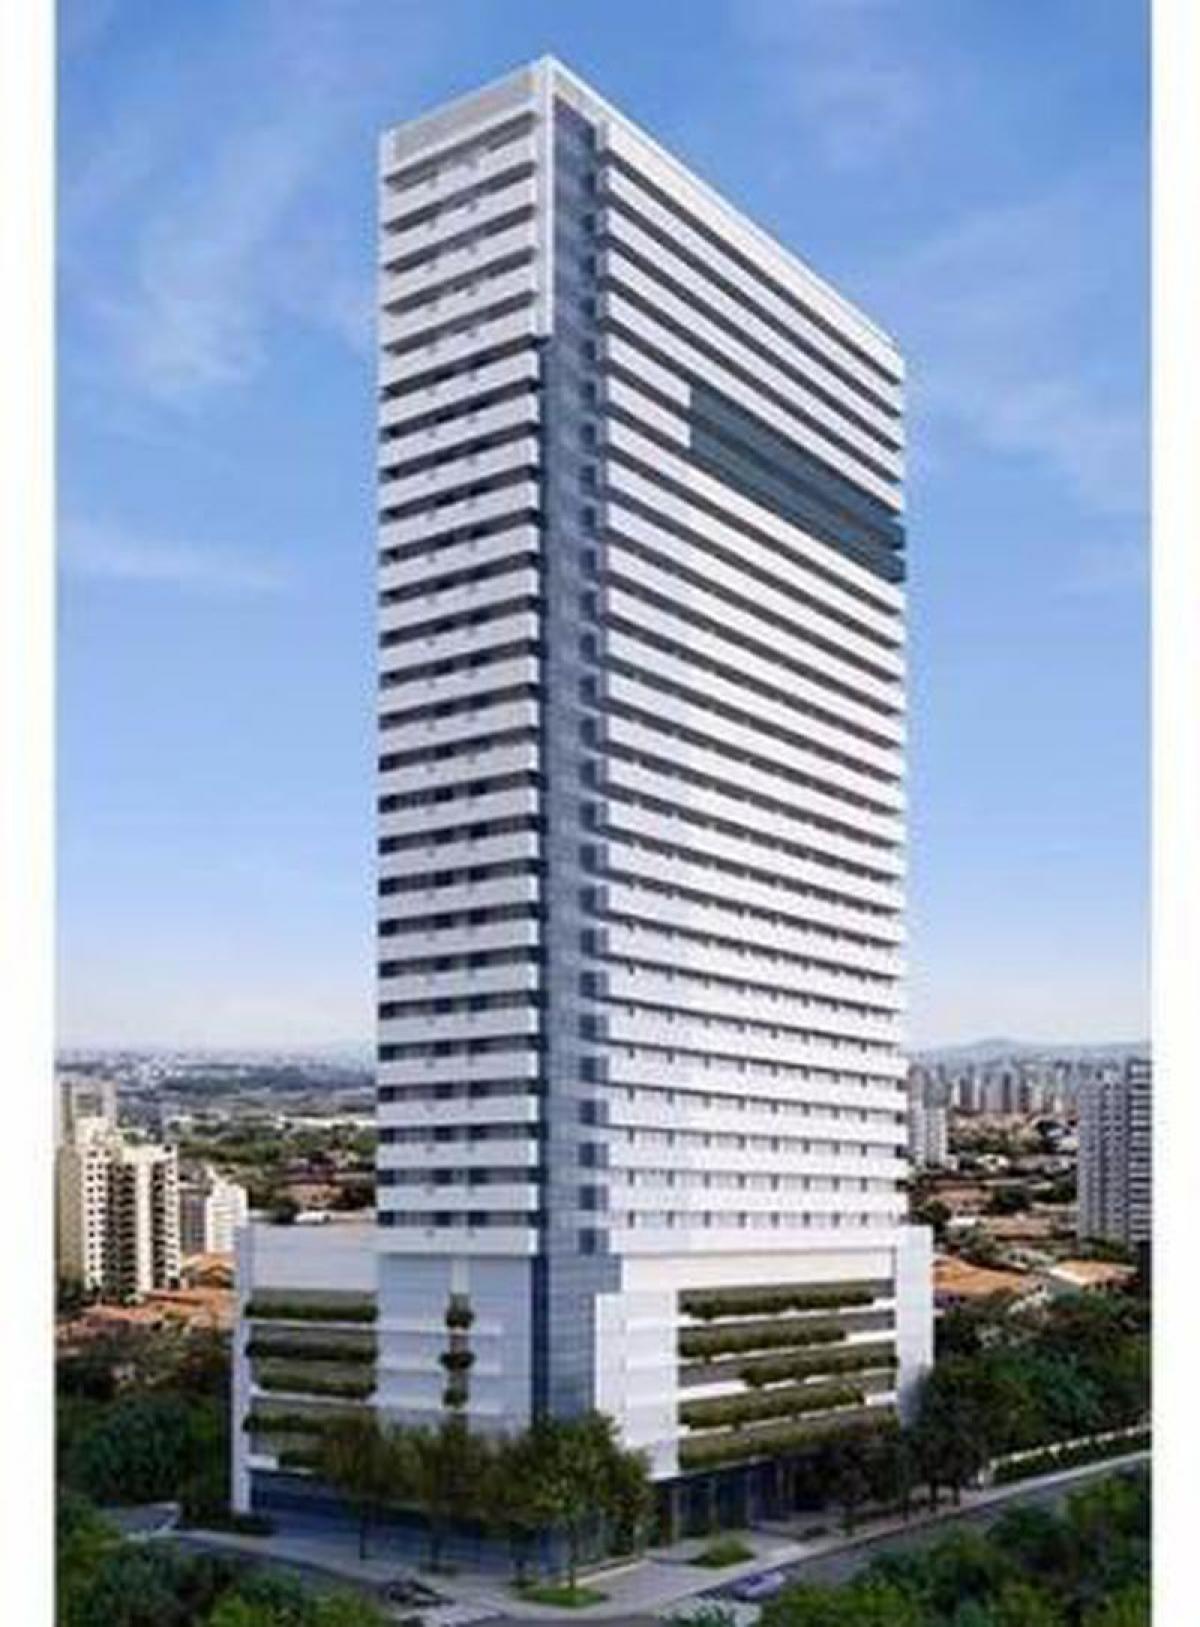 Picture of Commercial Building For Sale in Santos, Sao Paulo, Brazil